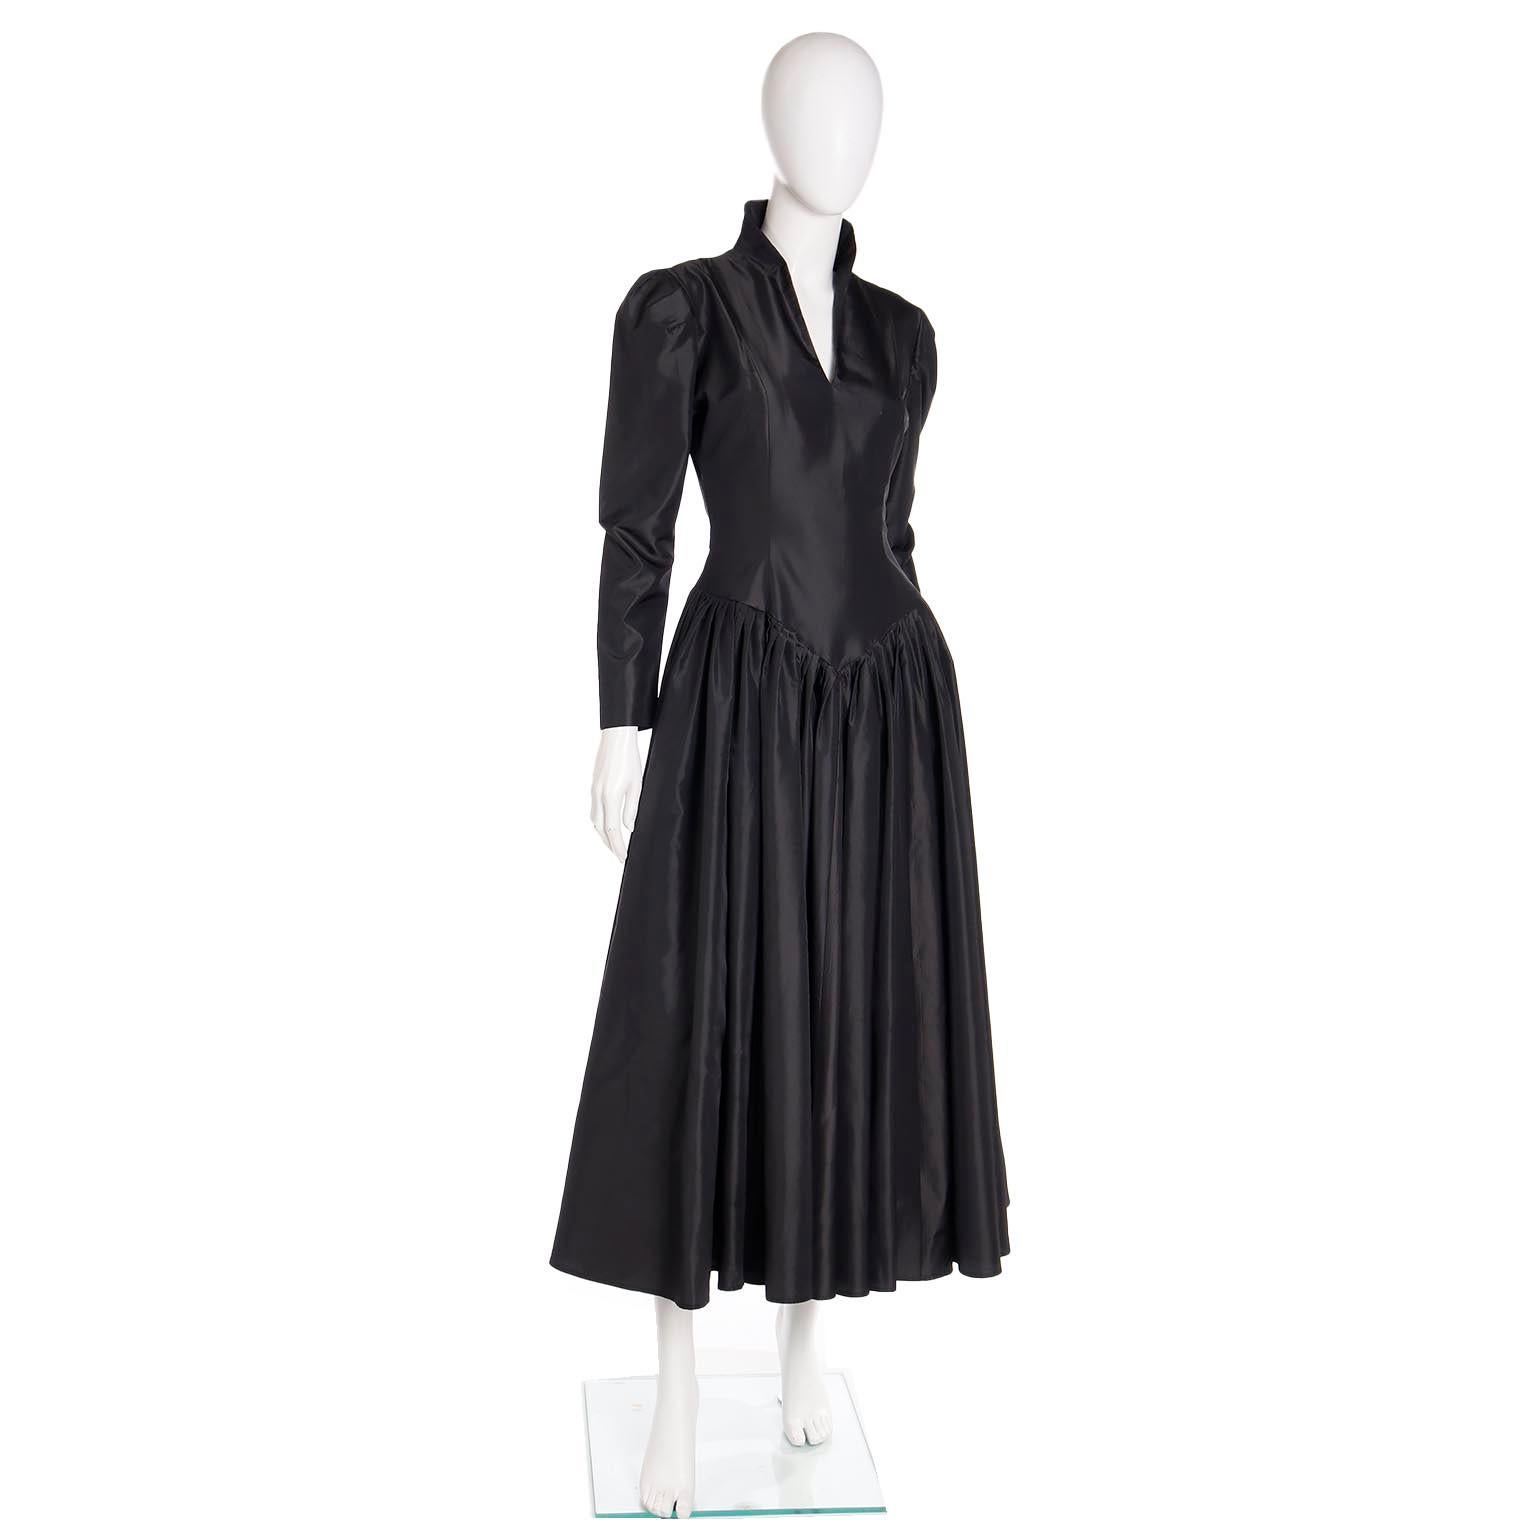 1980s Norma Kamali Victorian Inspired Black Dress In Excellent Condition For Sale In Portland, OR